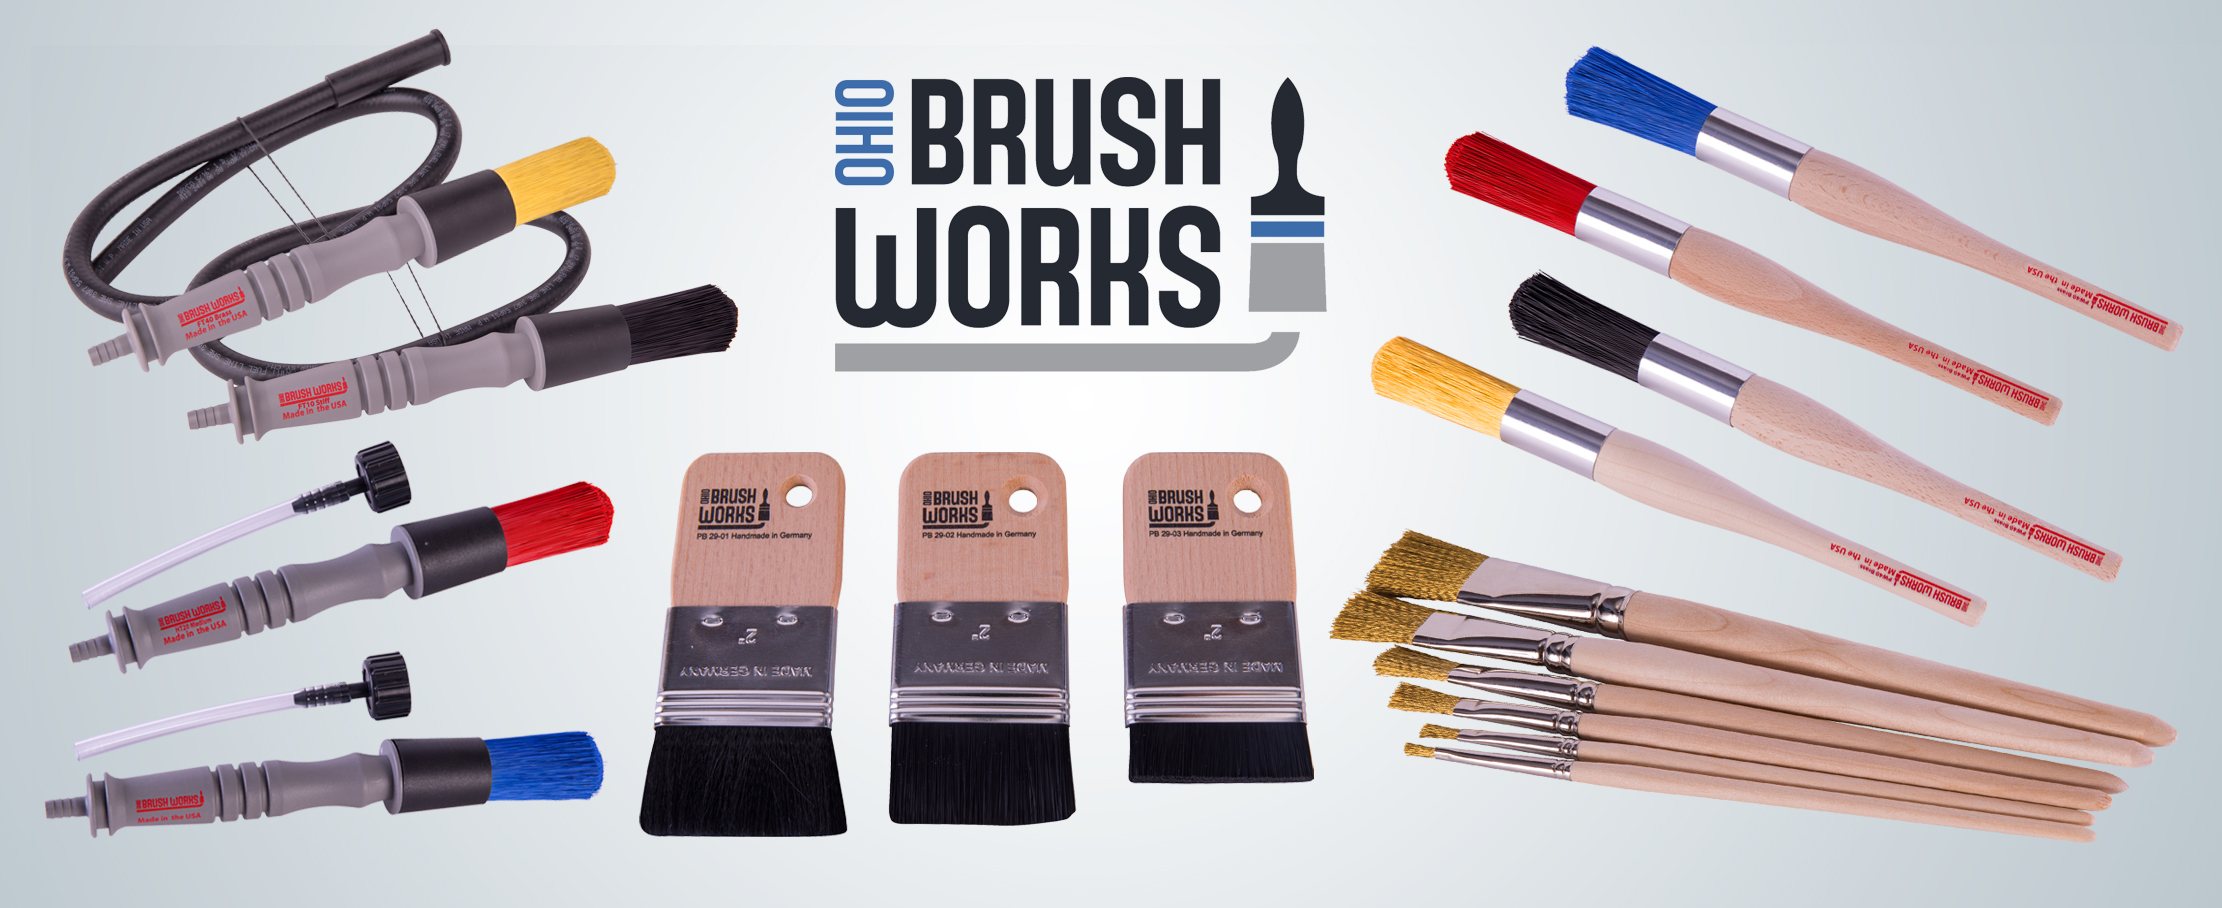 Automann Adds Shop Brushes by Ohio Brush Works